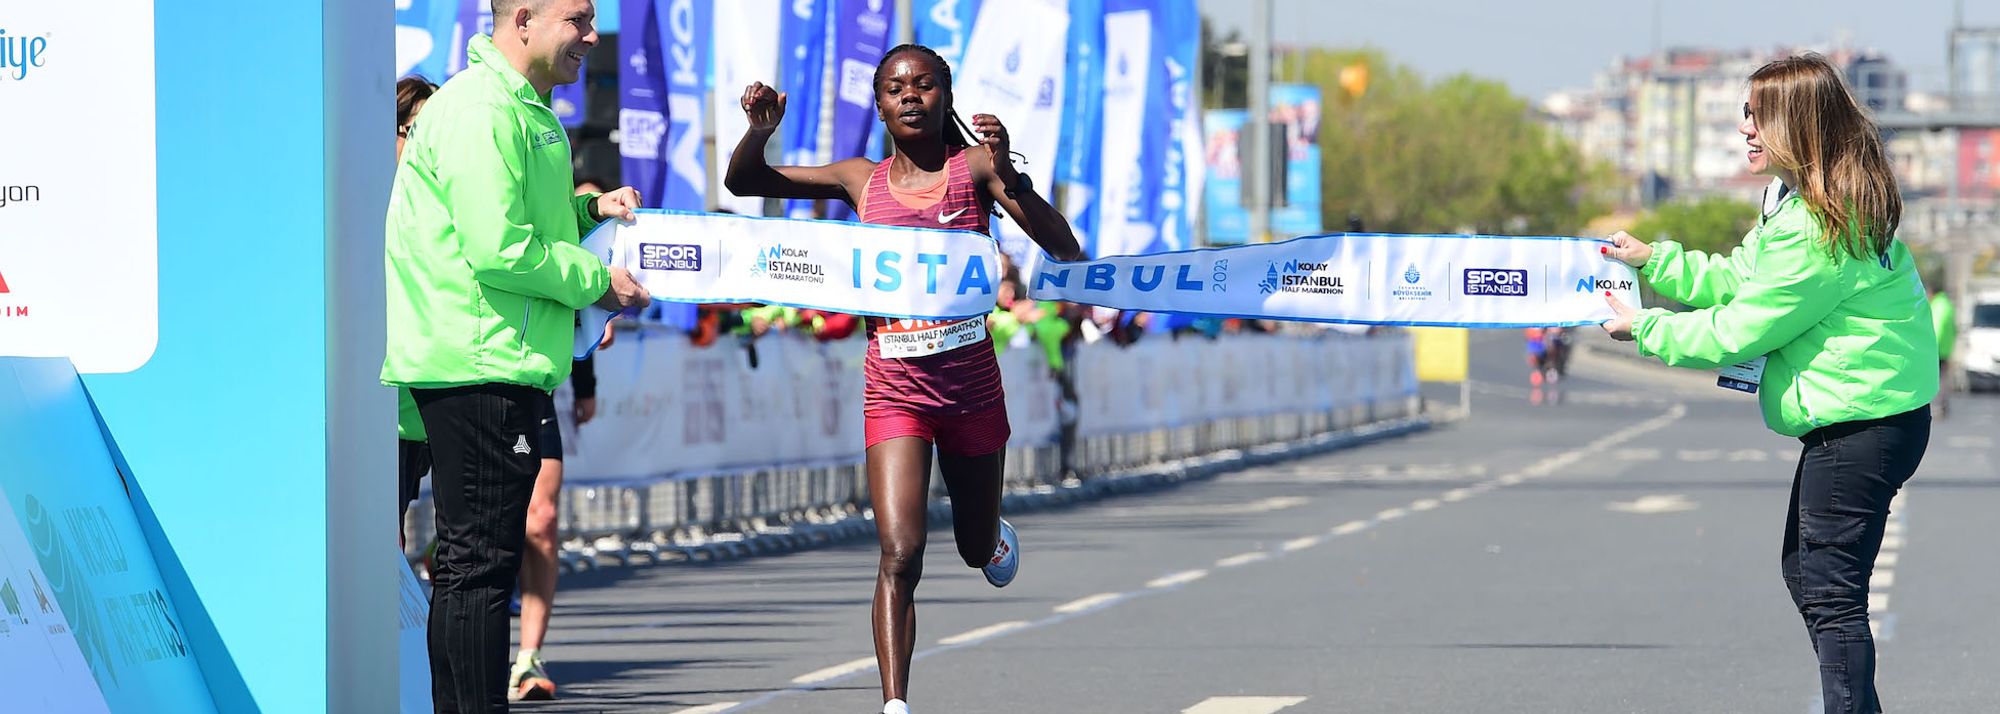 Purity Komen was a surprise women's race winner of the N Kolay Istanbul Half Marathon, while Daniel Ebenyo won the men's race to complete a Kenyan double at the World Athletics Gold Label event on Sunday